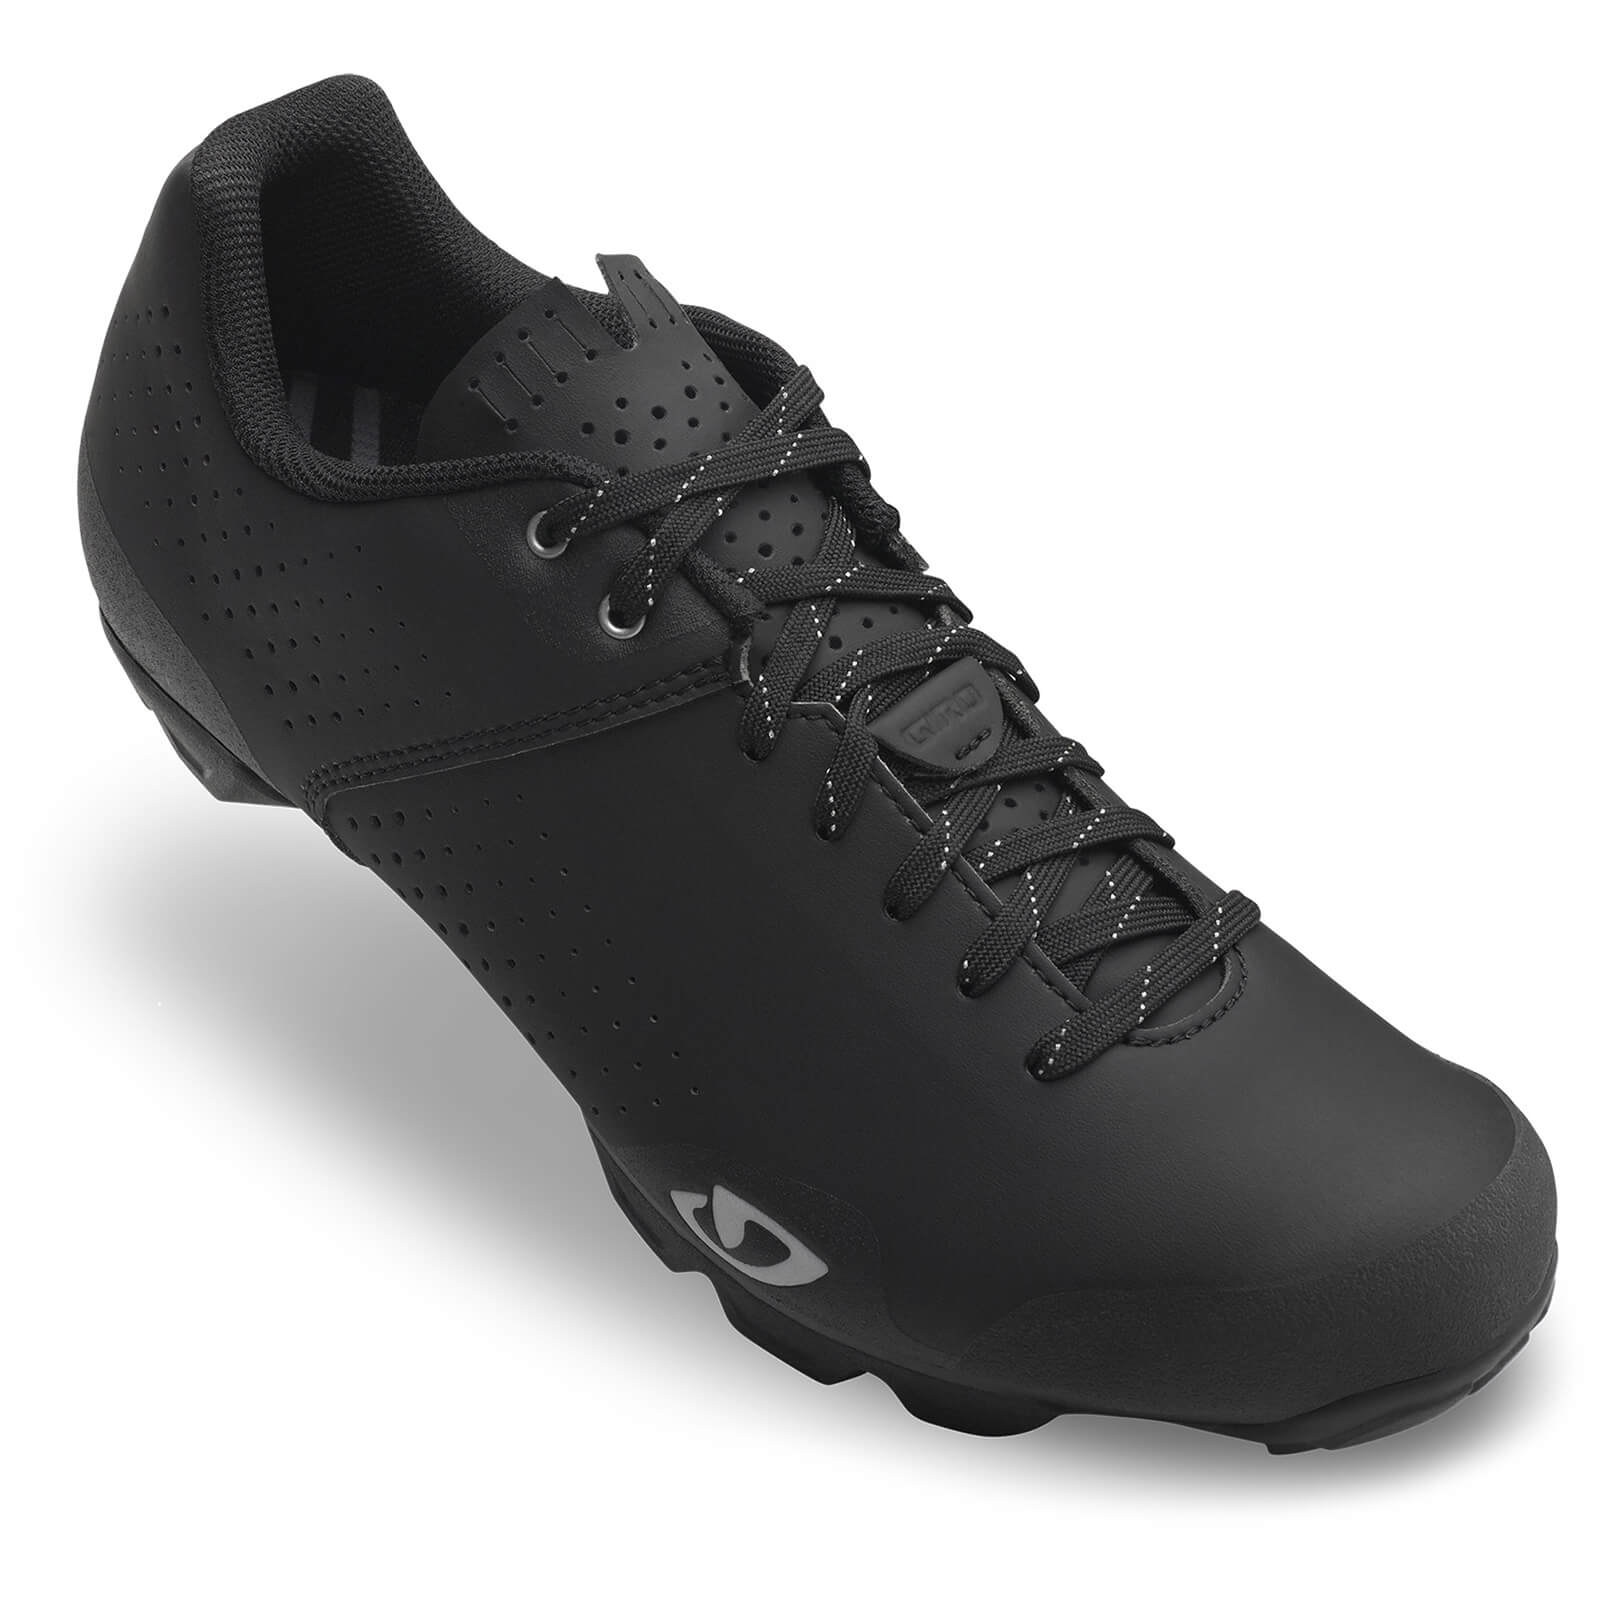 Giro Privateer Lace MTB Shoes – 42 – Black